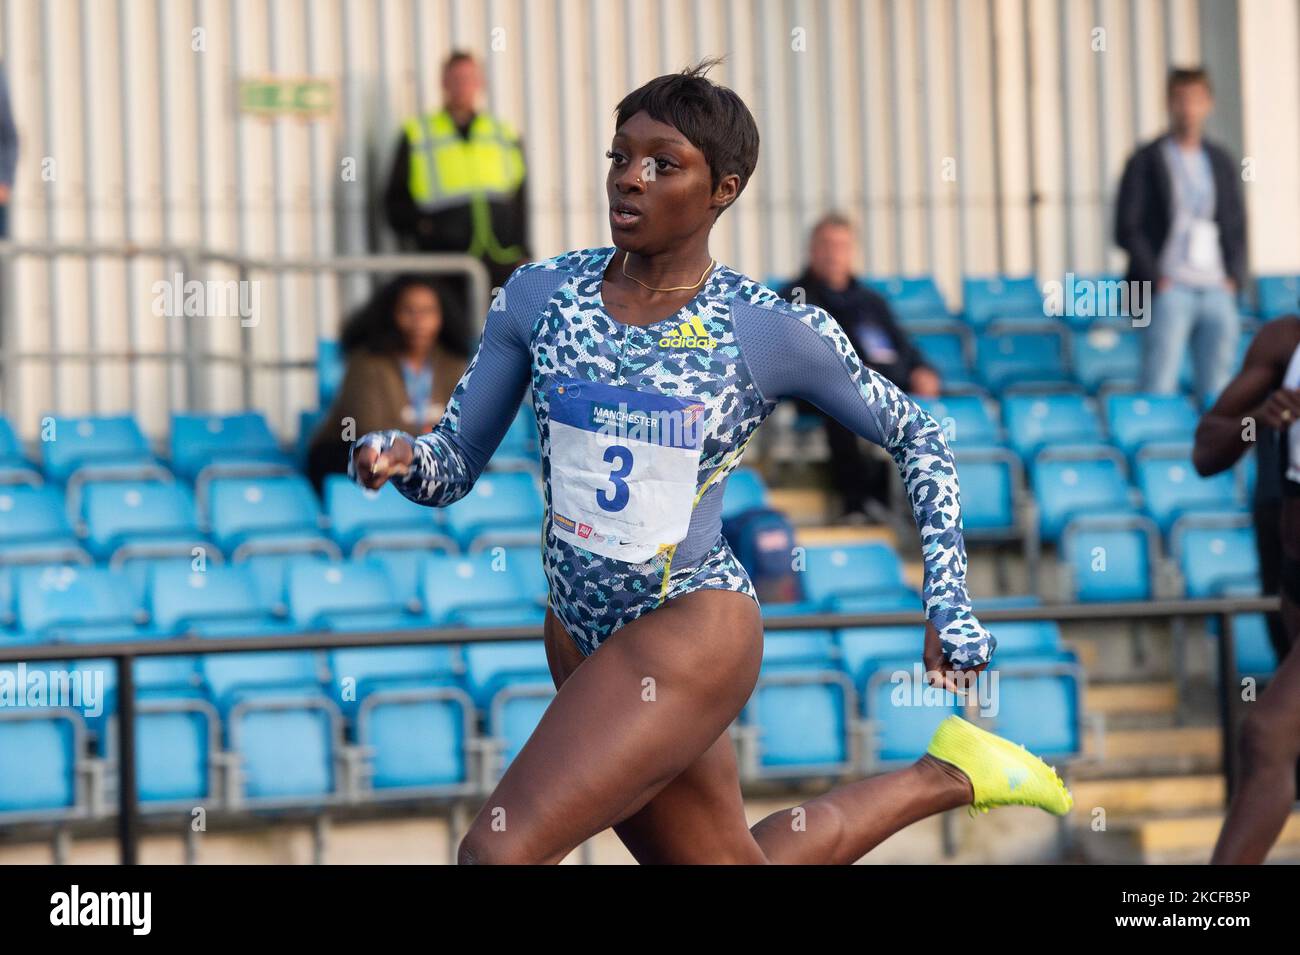 Ama Pipi (GBR) winning the 400m during The Manchester Invitational athletics event at SportCity, Manchester on Thursday 27th May 2021. (Photo by Pat Scaasi/MI News/NurPhoto) Stock Photo